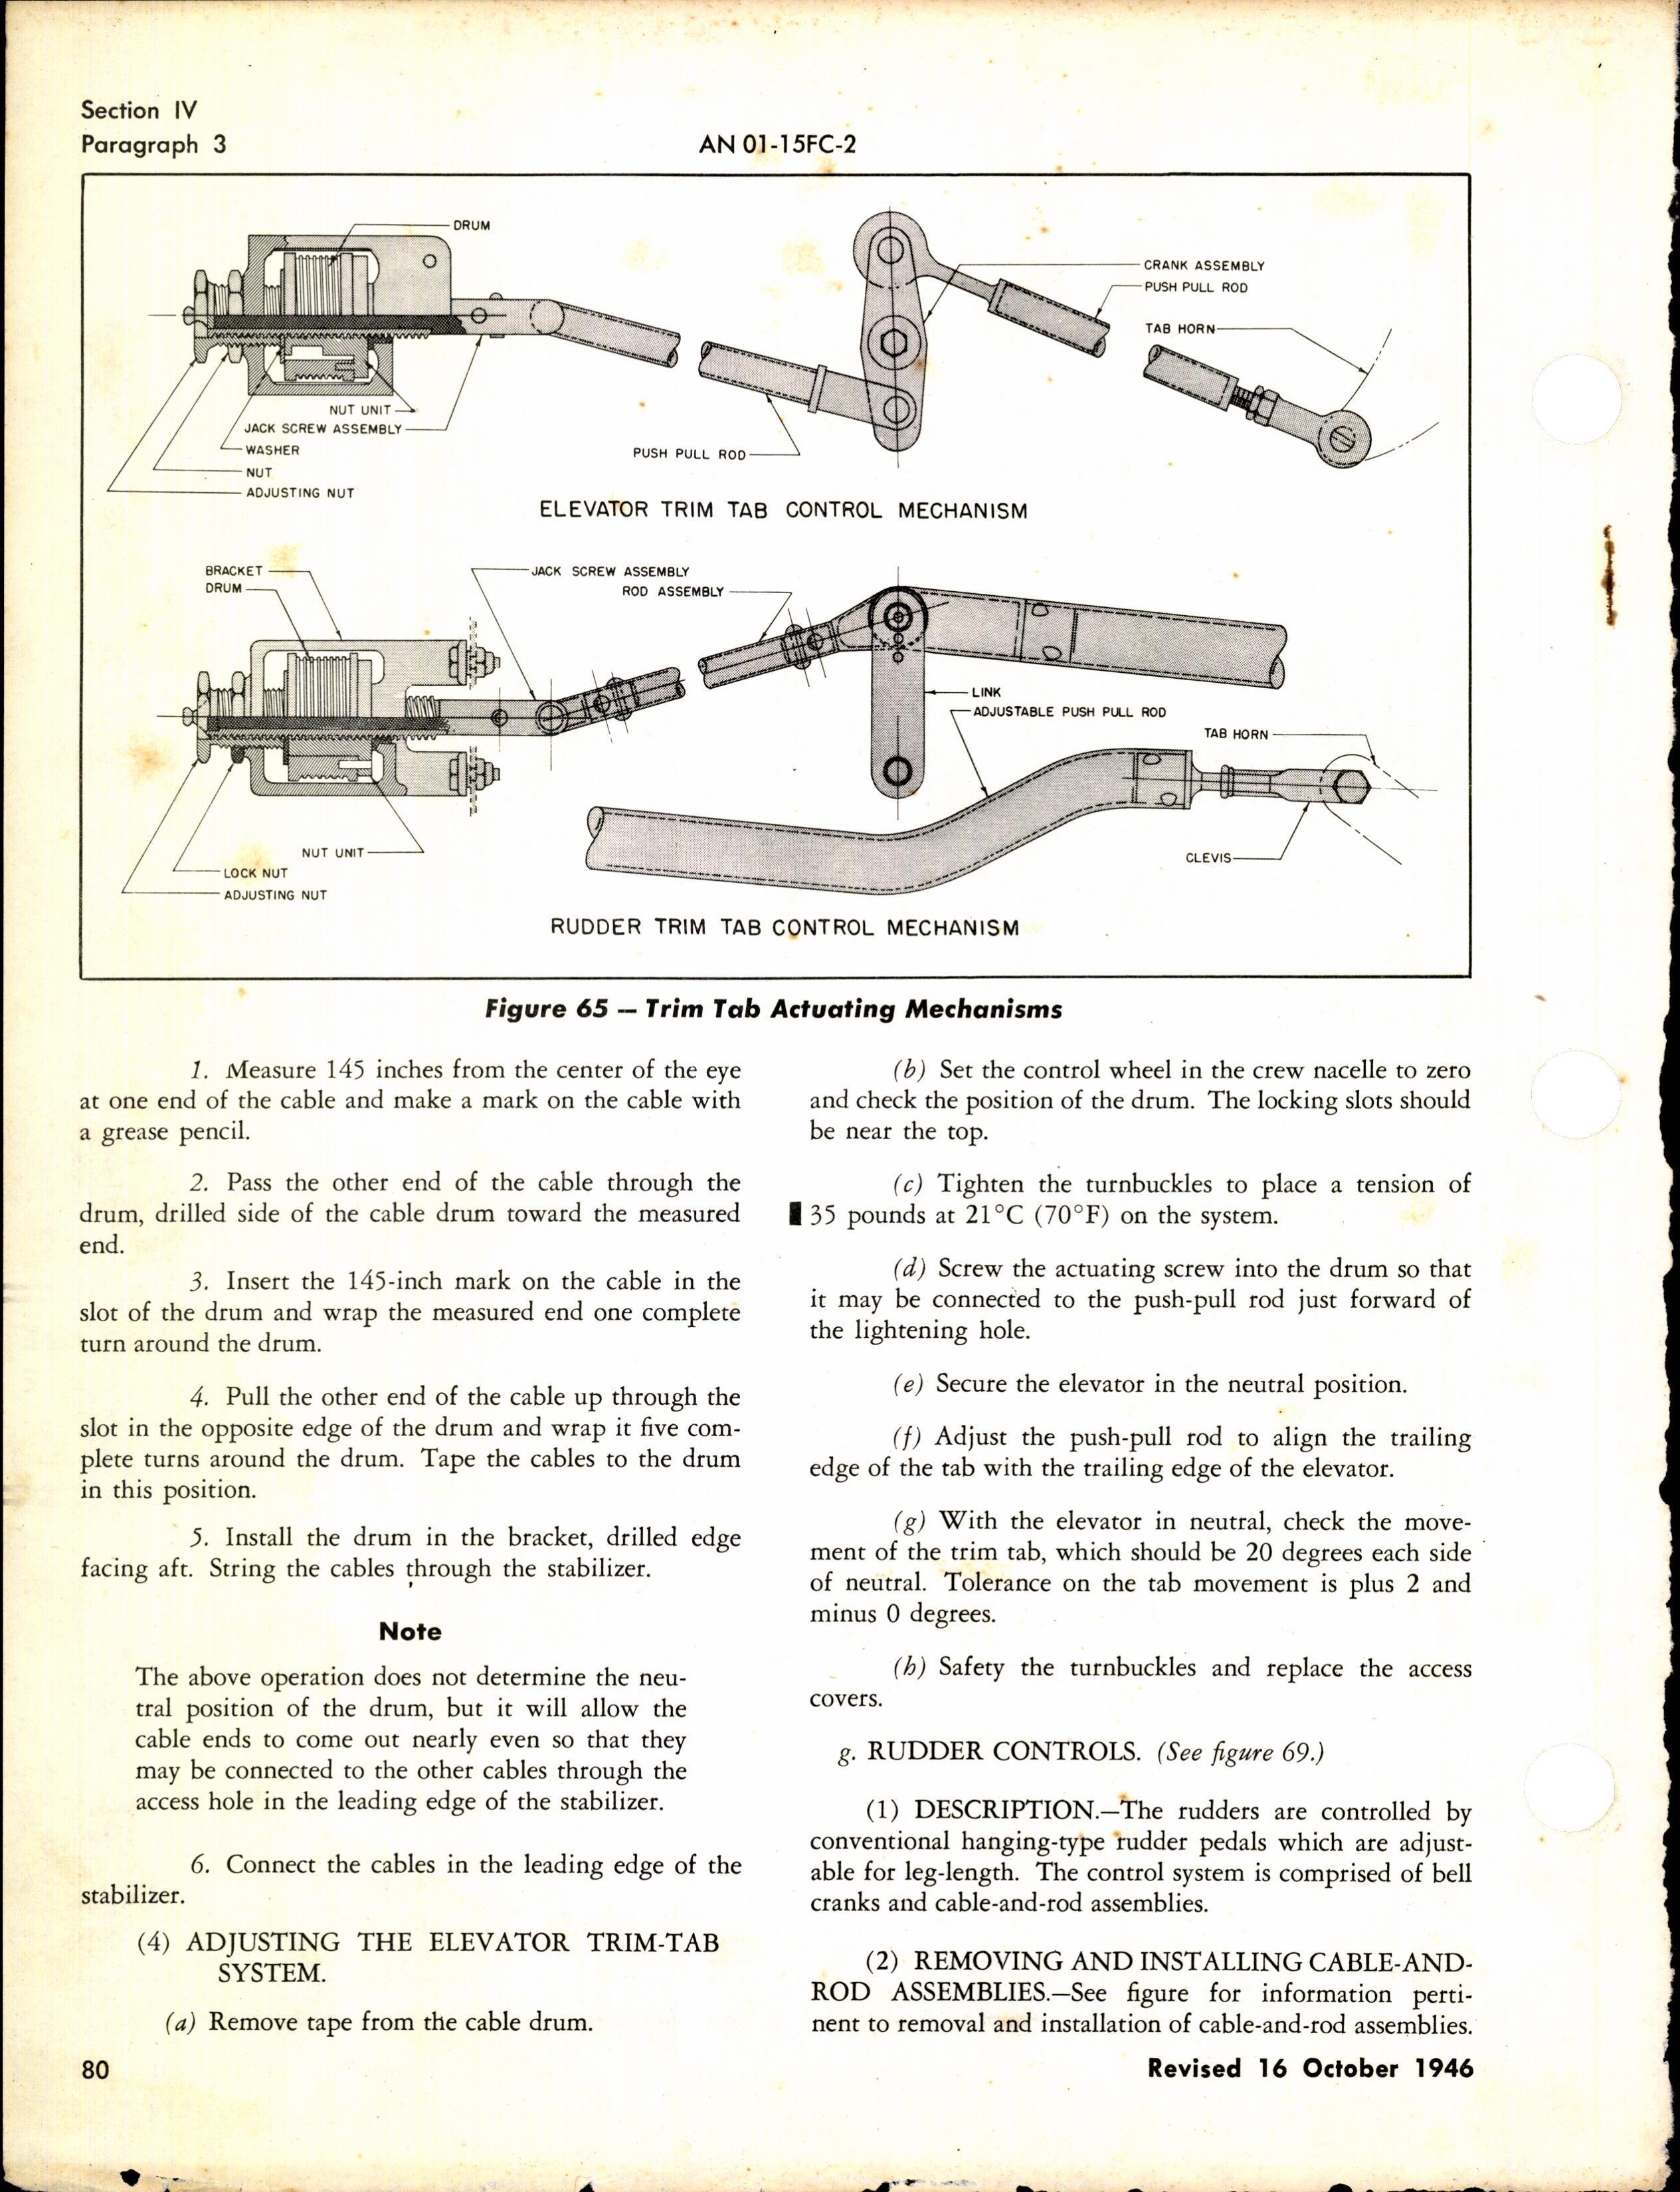 Sample page 6 from AirCorps Library document: Erection and Maintenance Instructions for P-61C Airplanes